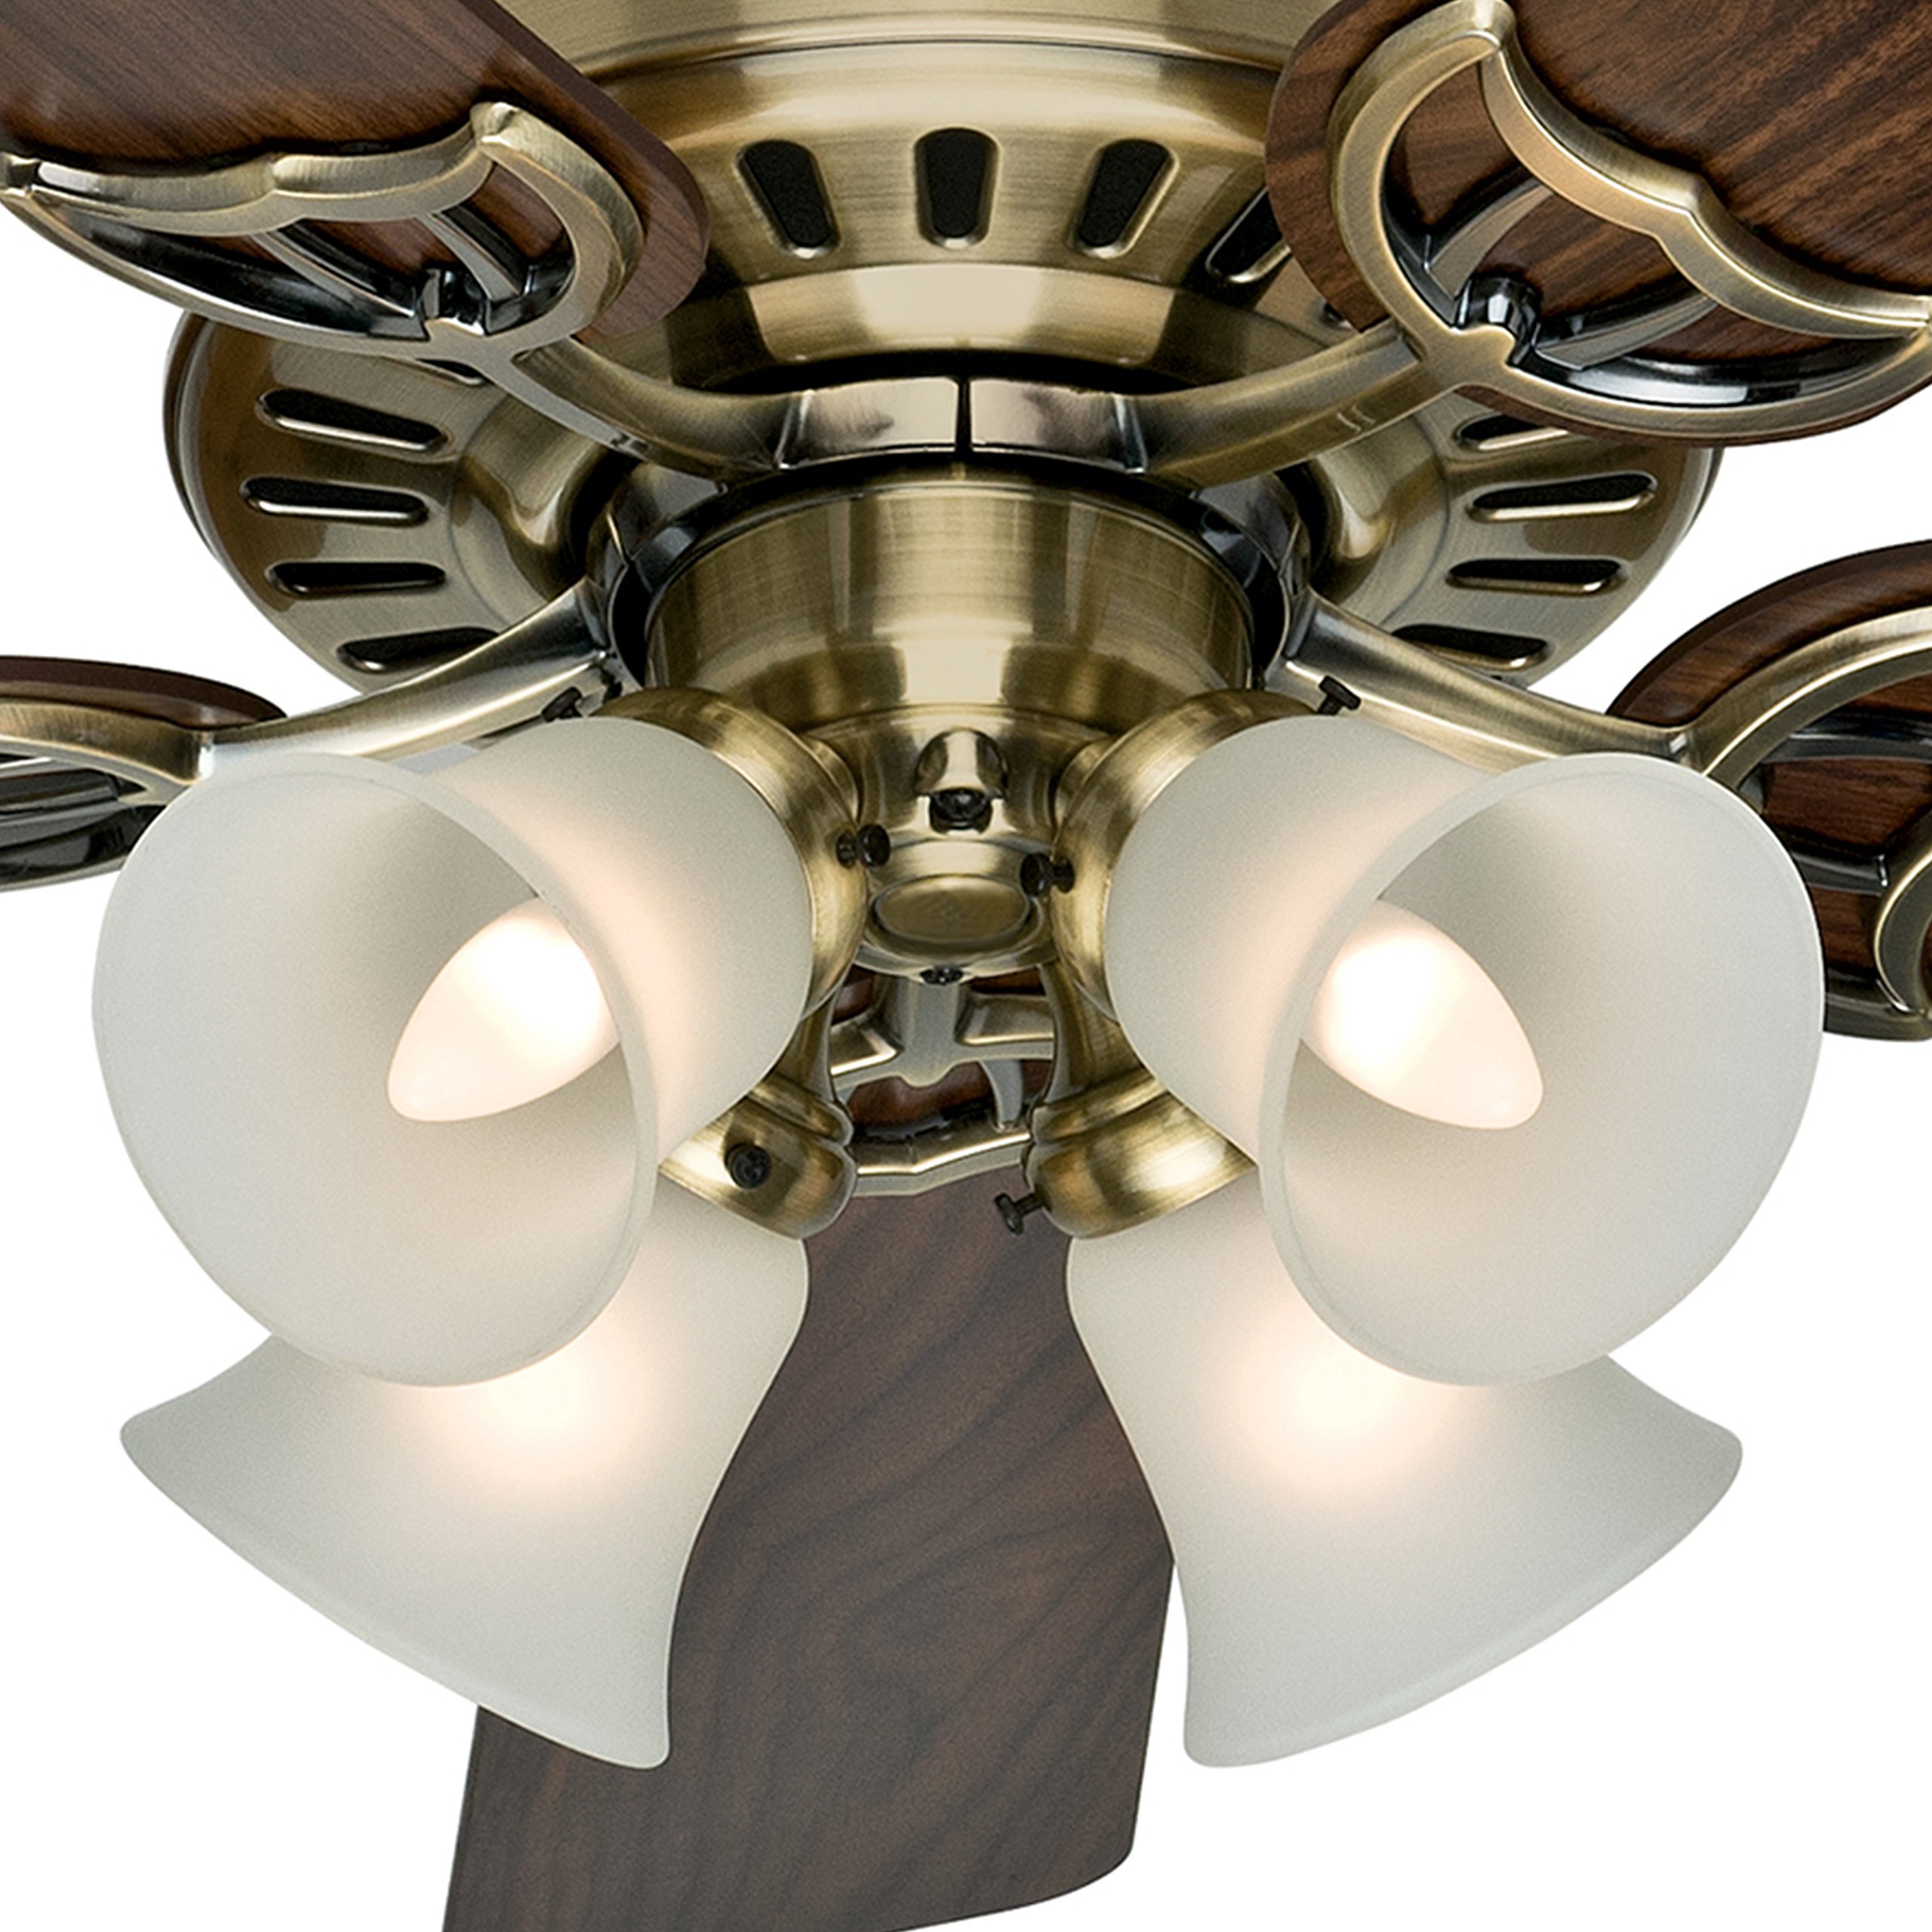 Hunter Fan 52 inch White Ceiling Fan with a Frosted Glass Light Kit, 5 Blade (Renewed) (Antique Brass)